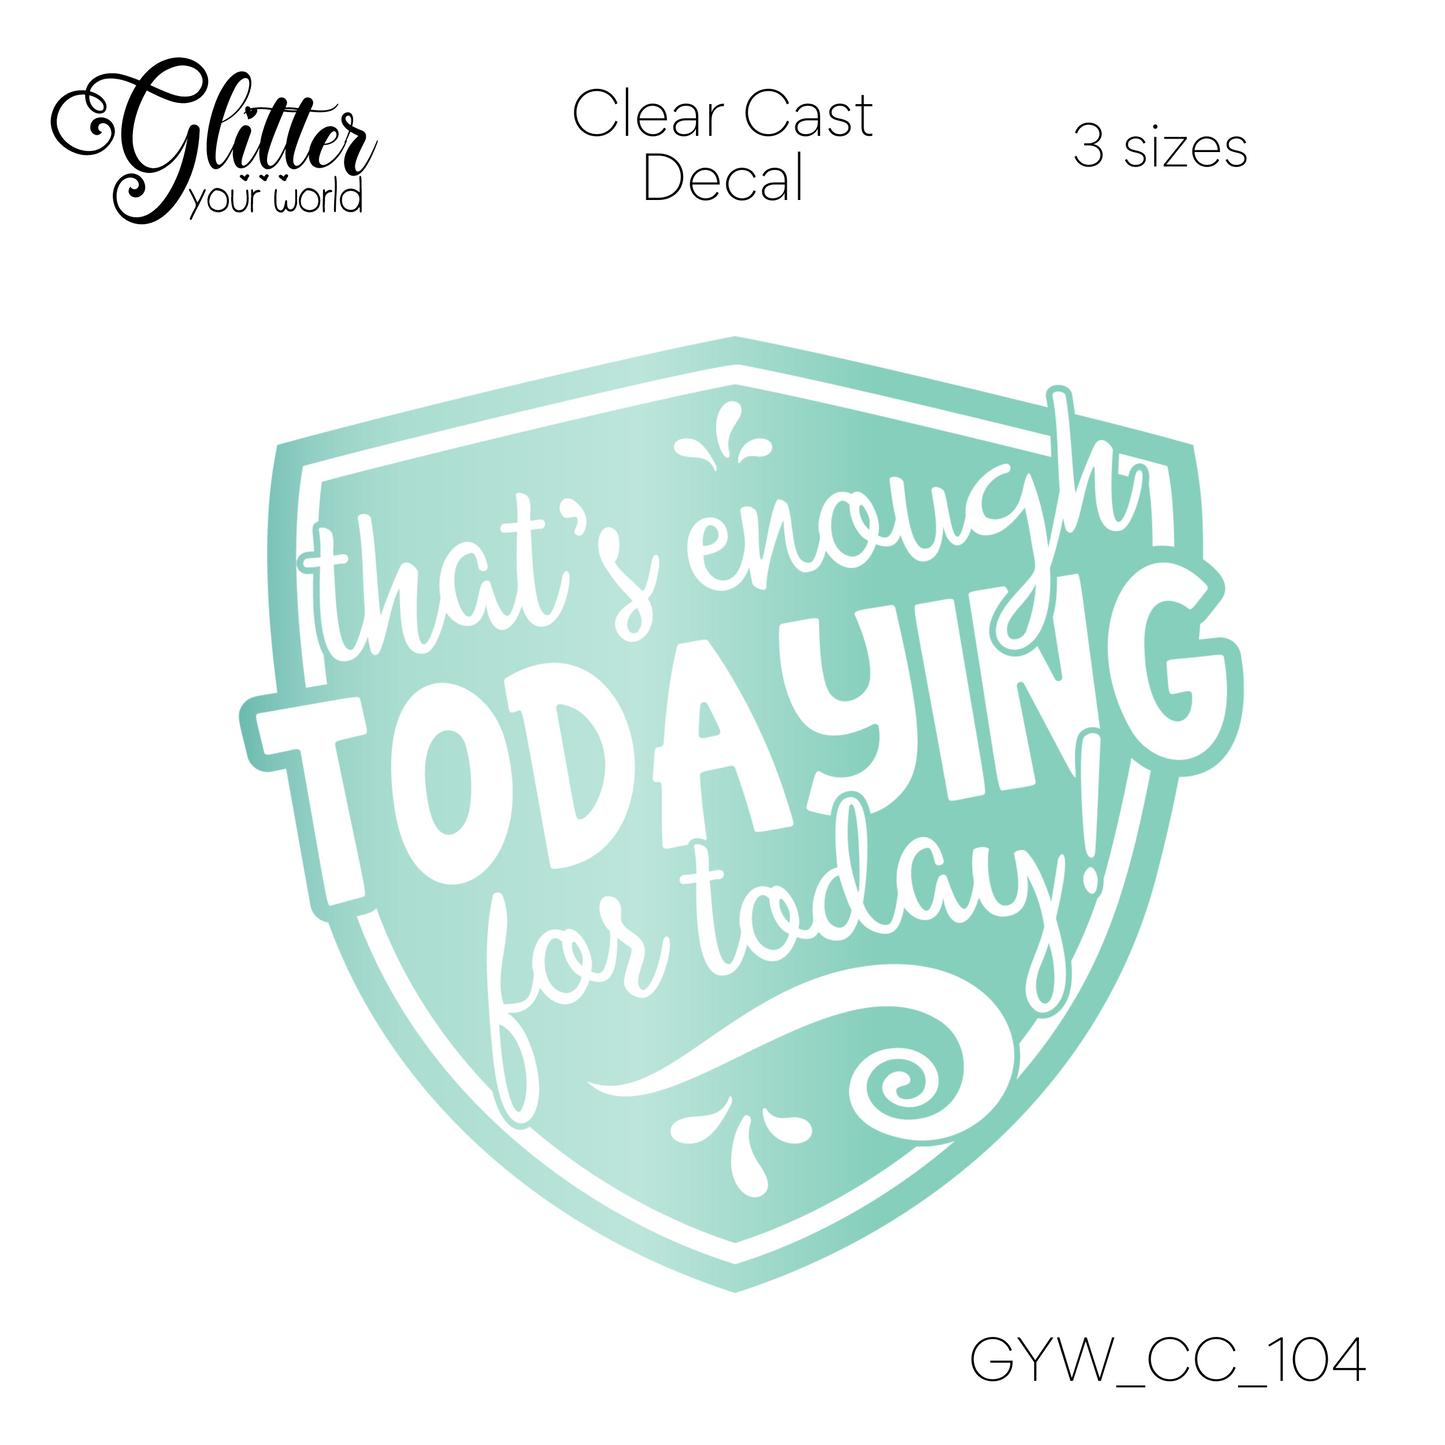 Thats Enough Todaying CC_104 Clear Cast Decal